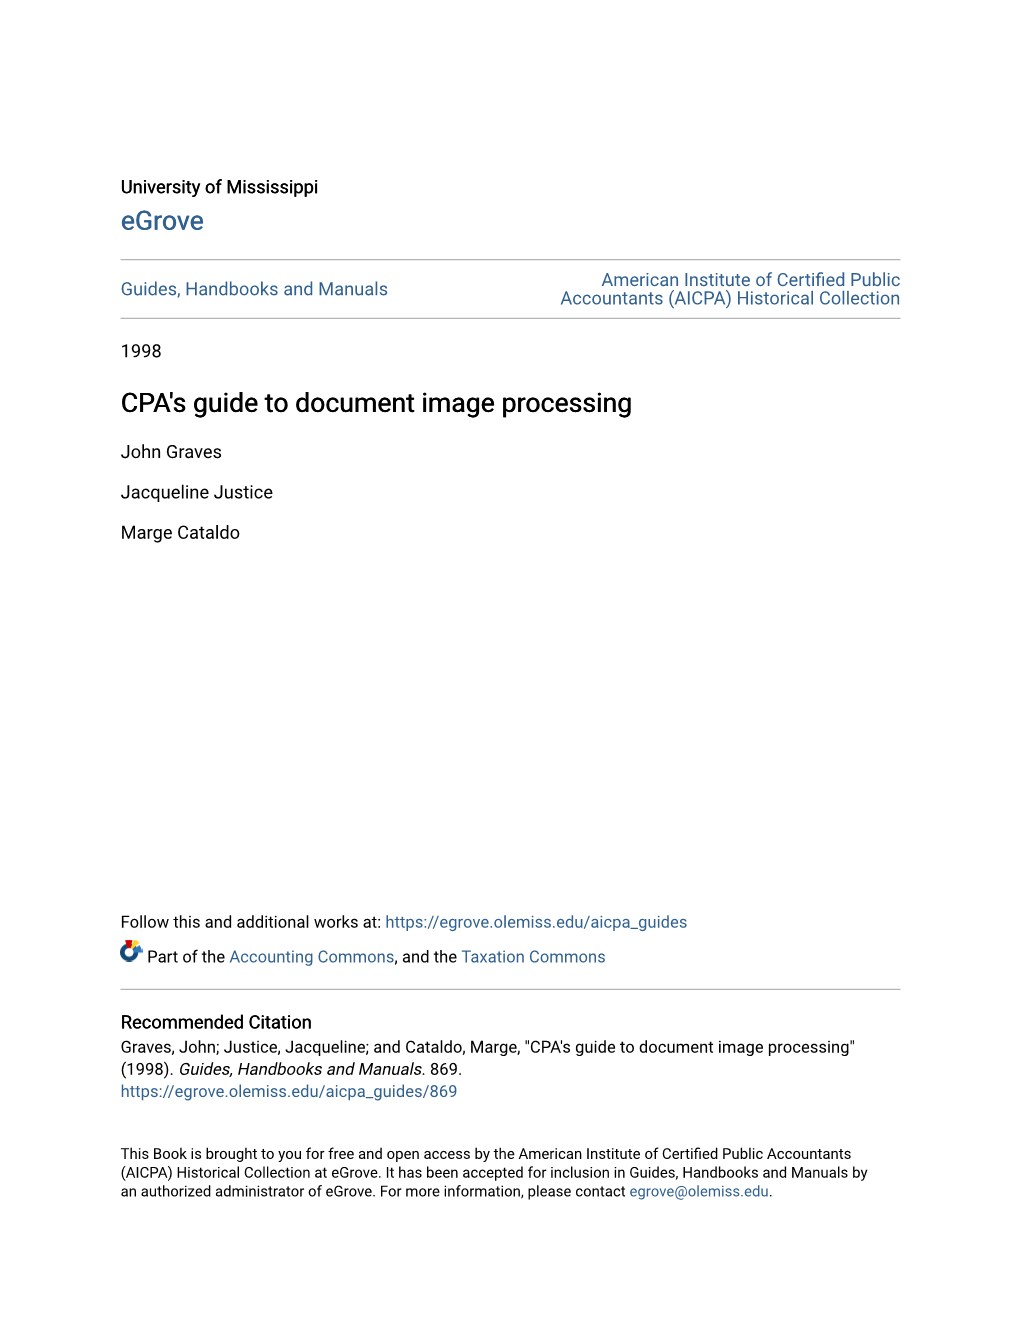 CPA's Guide to Document Image Processing